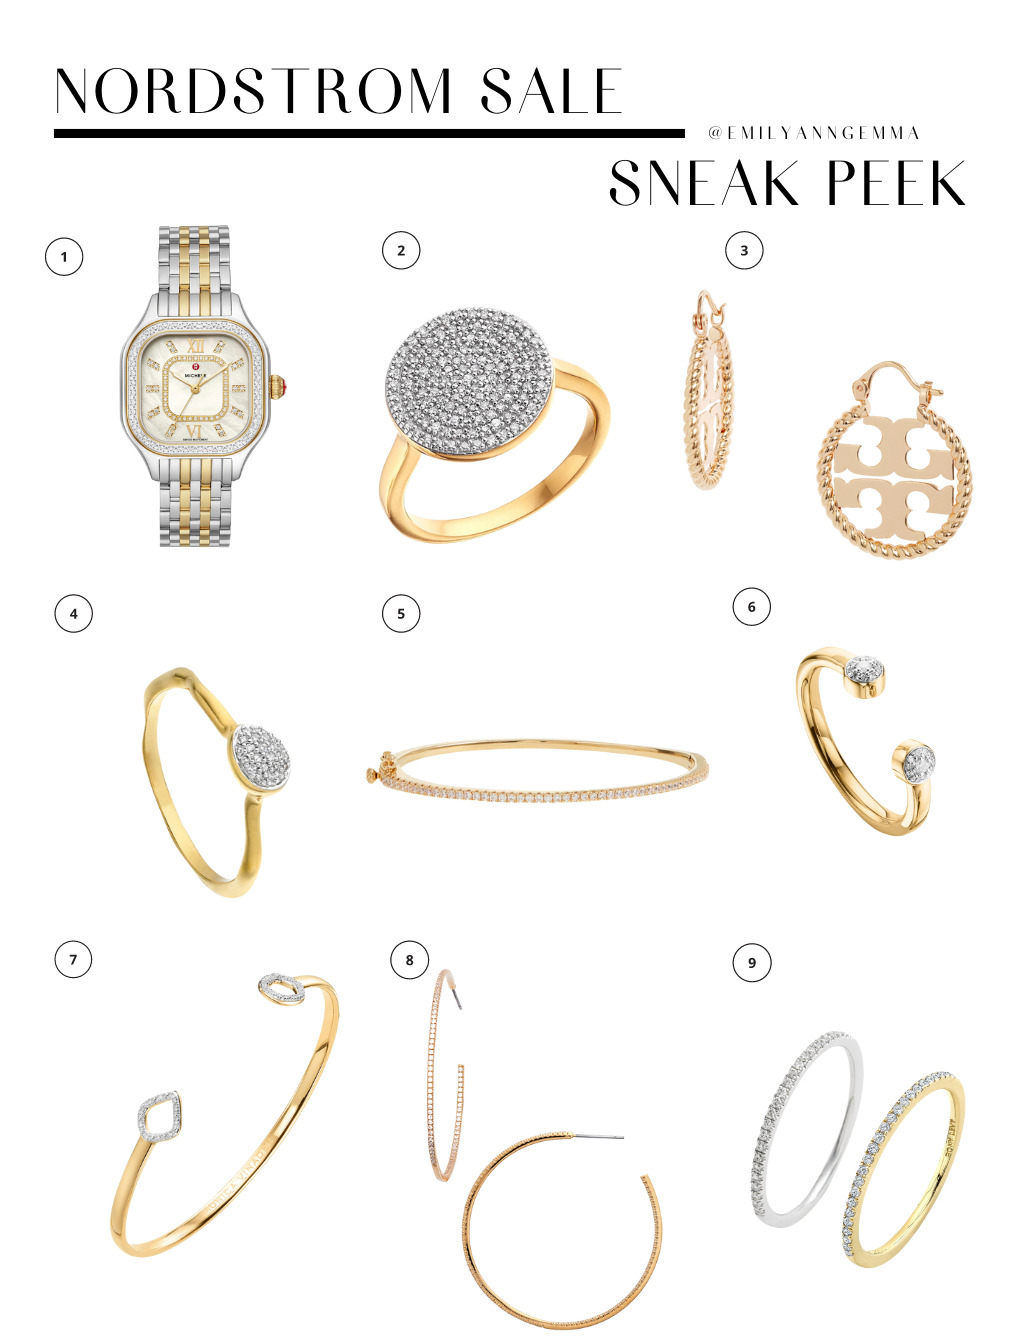 nsale 2021, nordstrom anniversary sale 2021, nSALE watch earrings bracelets and rings, must have blog posts nordstrom sale 2021, Emily Ann Gemma, the sweetest thing blog, Nordstrom Anniversary Sale by popular US fashion blog | Nordstrom Anniversary Sale by popular US fashion blog, The Sweetest Thing: collage image of a watch, Tory Burch hoop earrings, gold hoop earrings, diamond disc ring, diamond stacking rings, CZ bangle, and diamond cuff. 